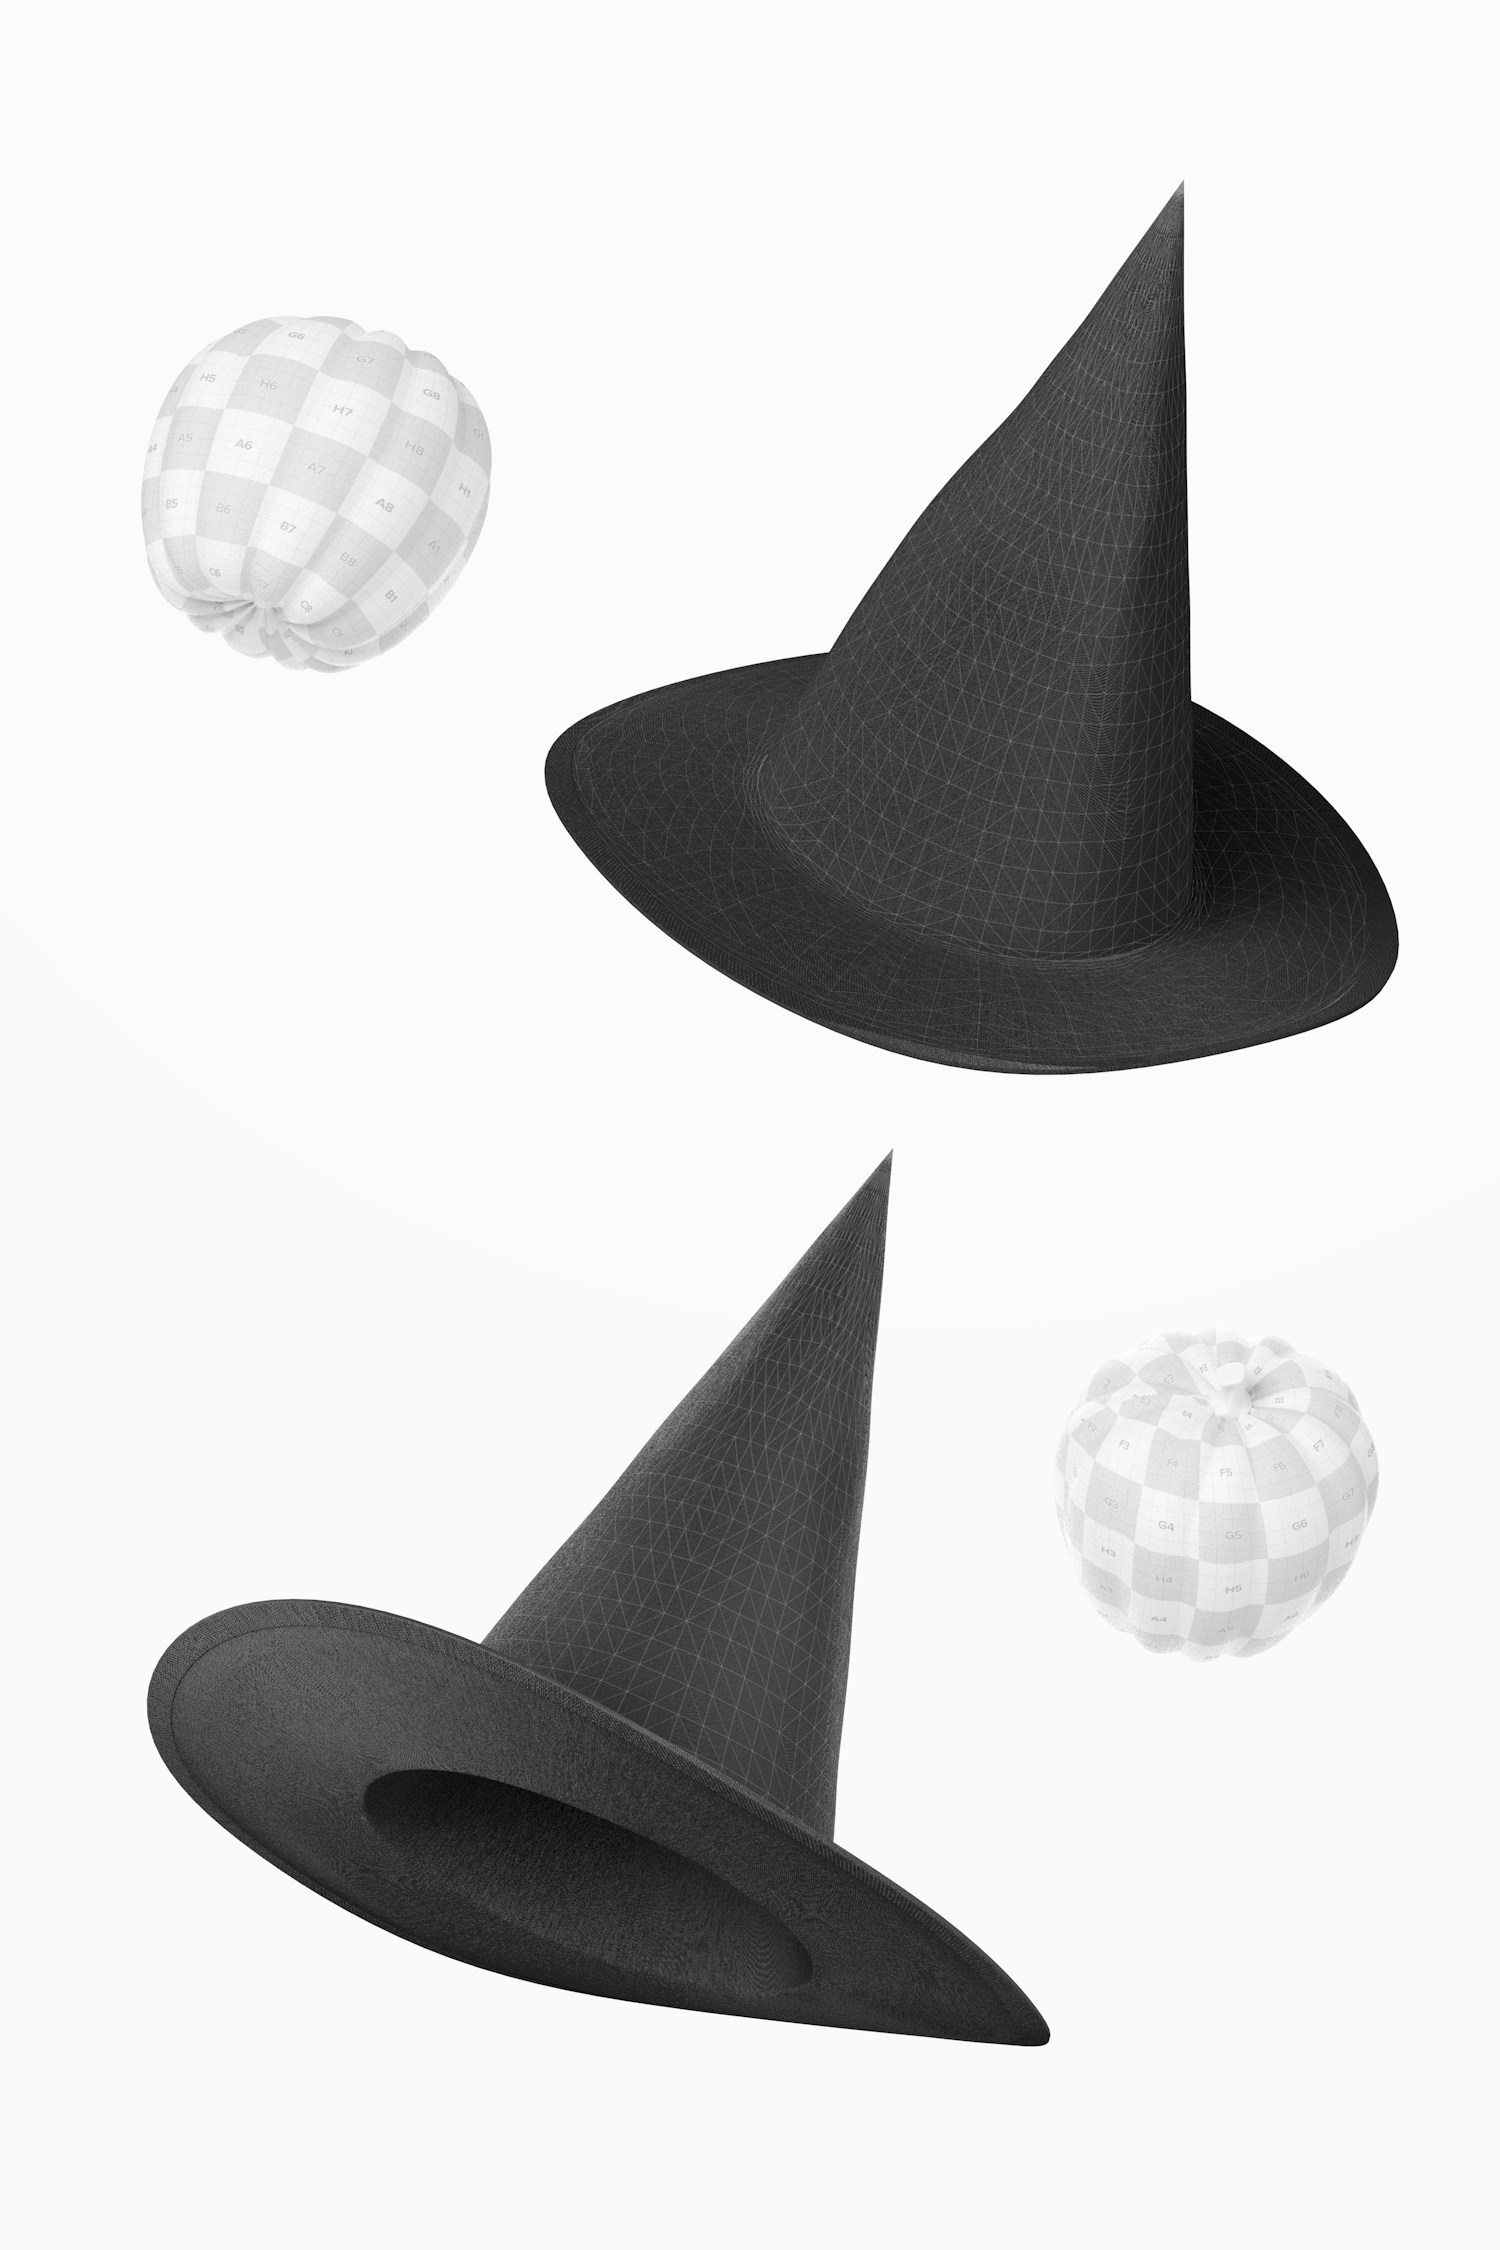 Witch Hats Mockup, Floating